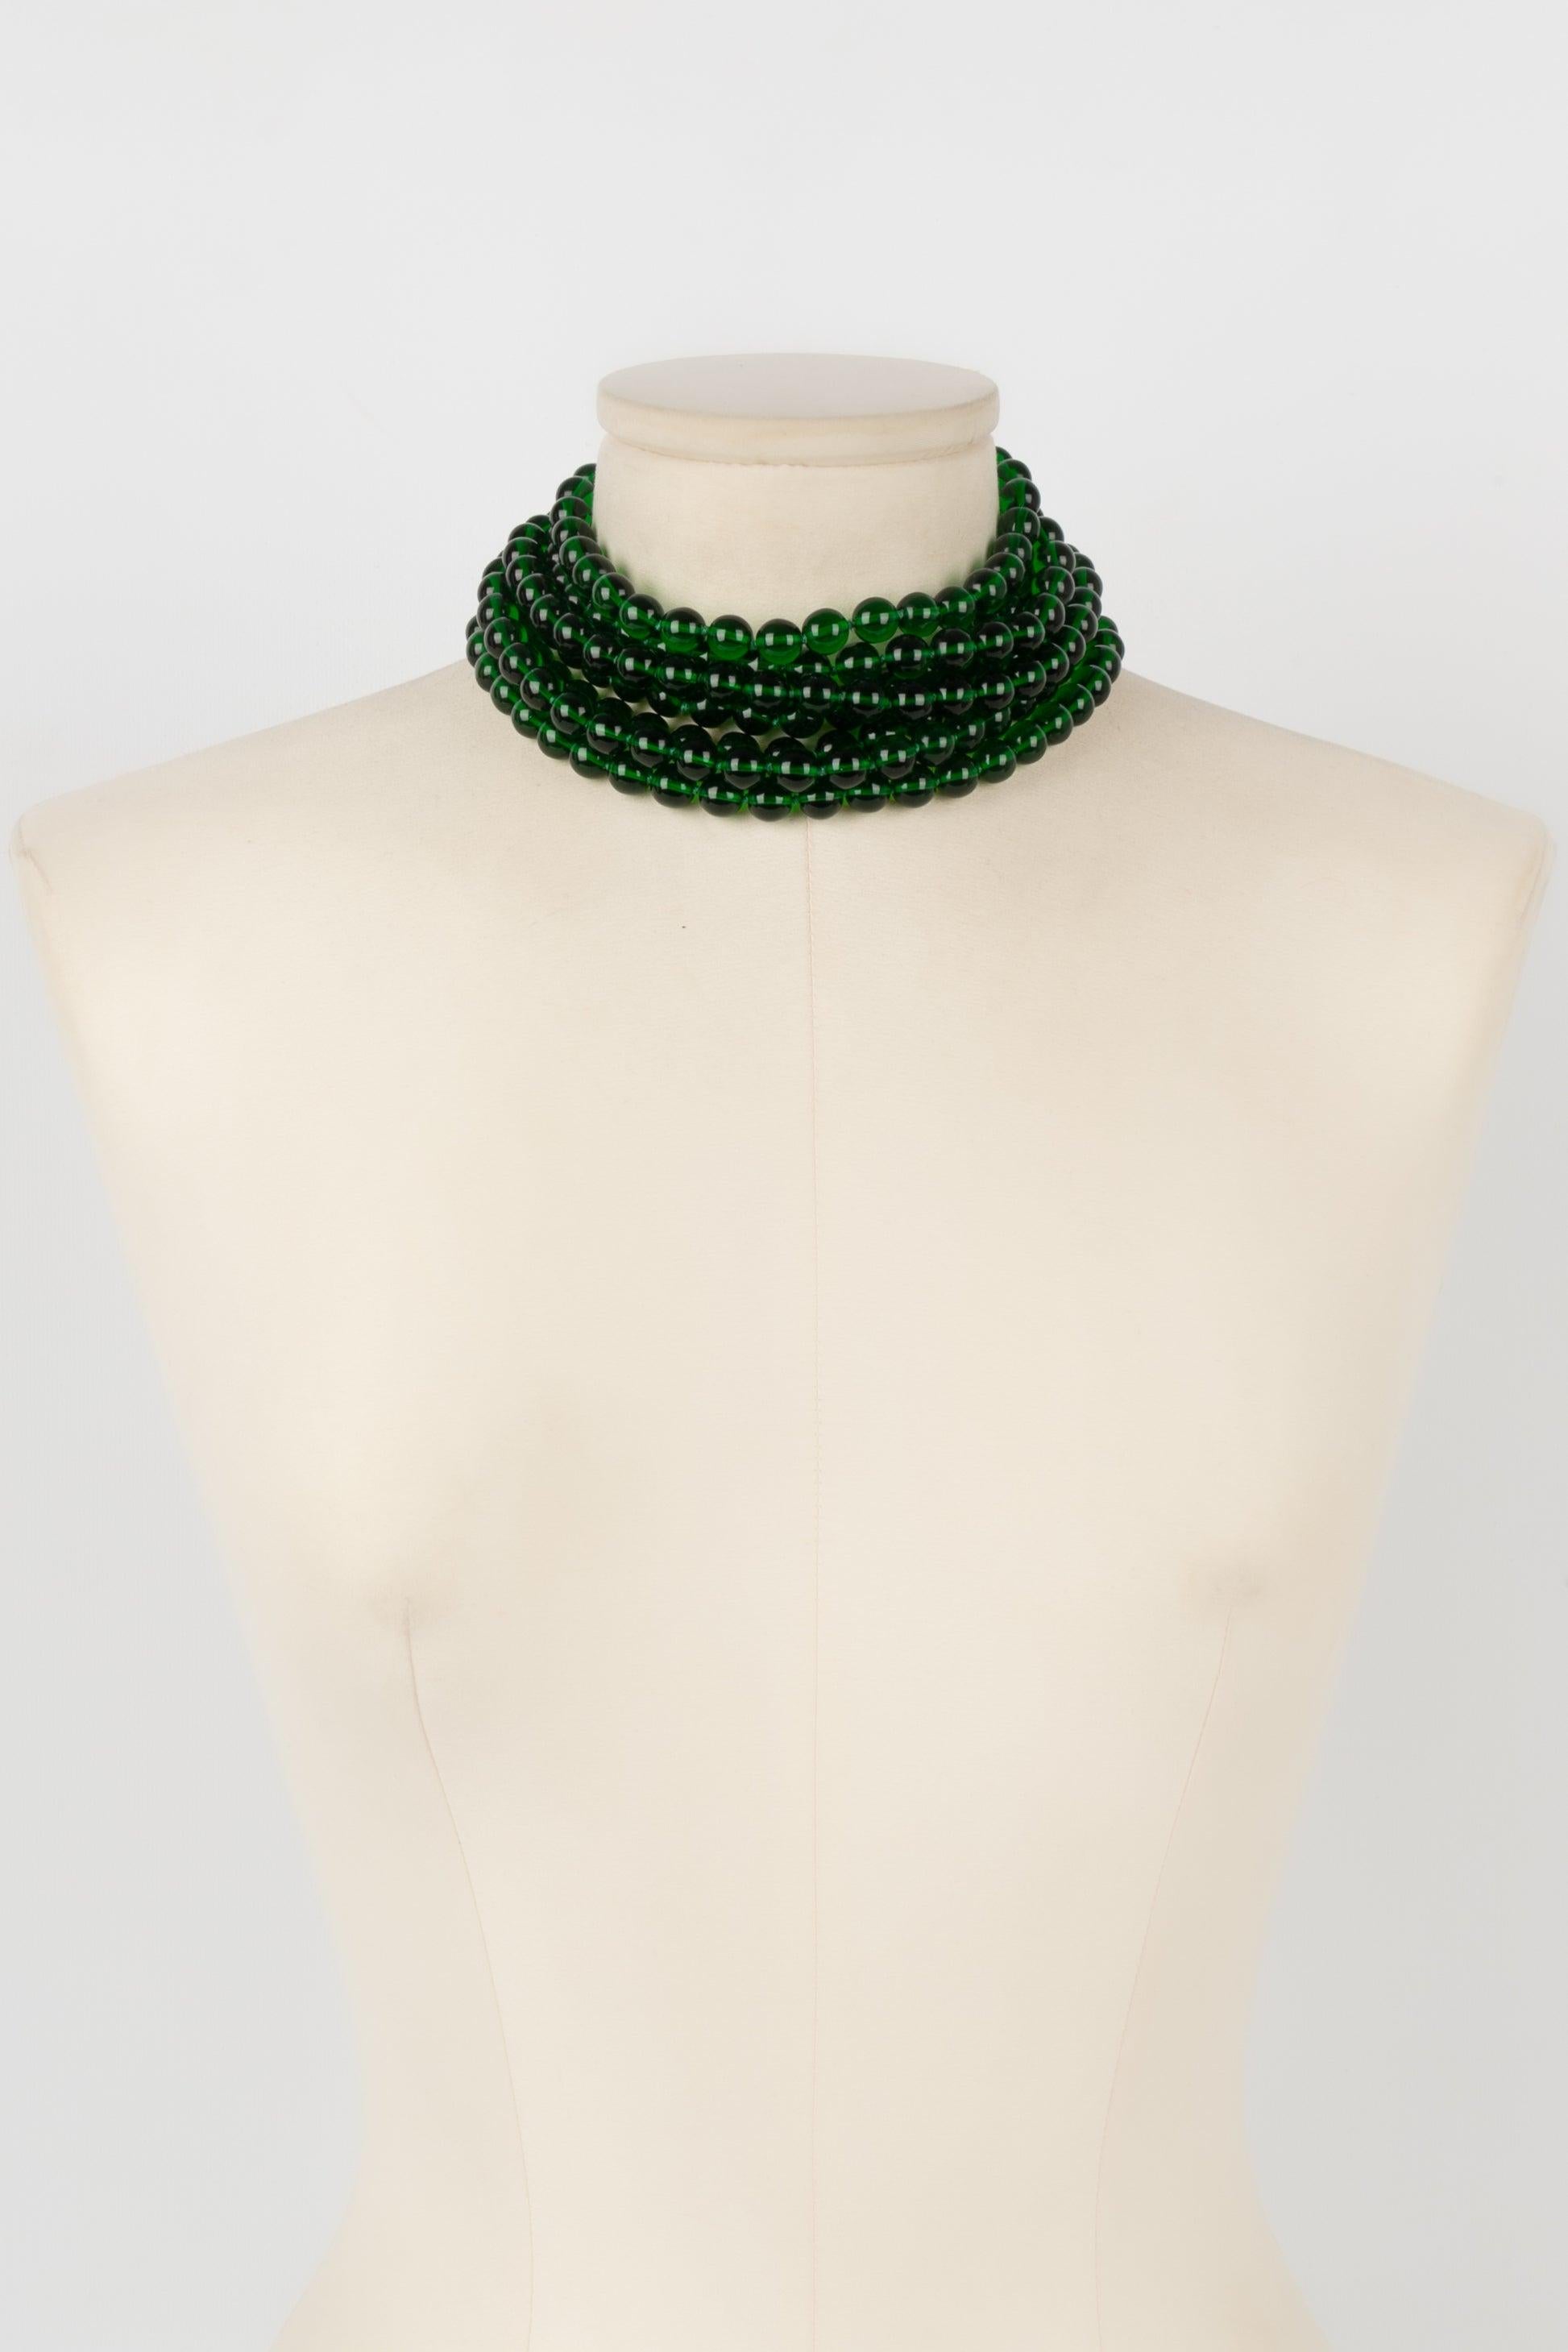 Women's Chanel Short Necklace Made Up of Several Rows of Green Glass Beads, 1980s For Sale